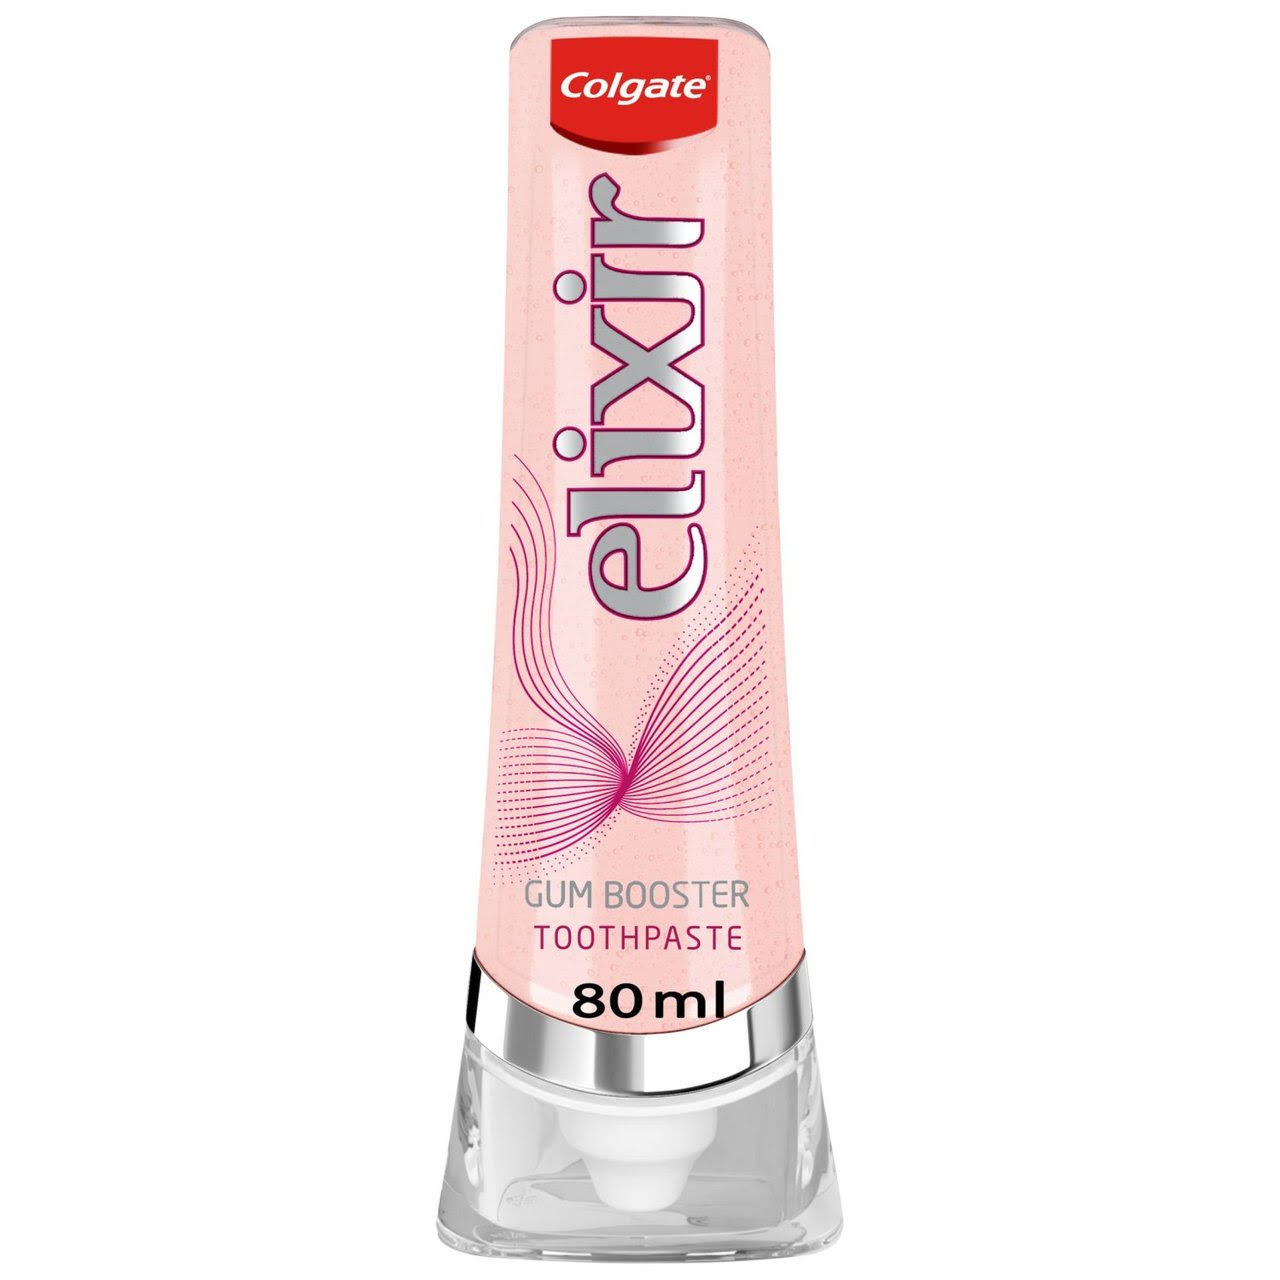 Colgate Elixir Gum Booster Toothpaste with Hyaluronic Acid 80ml